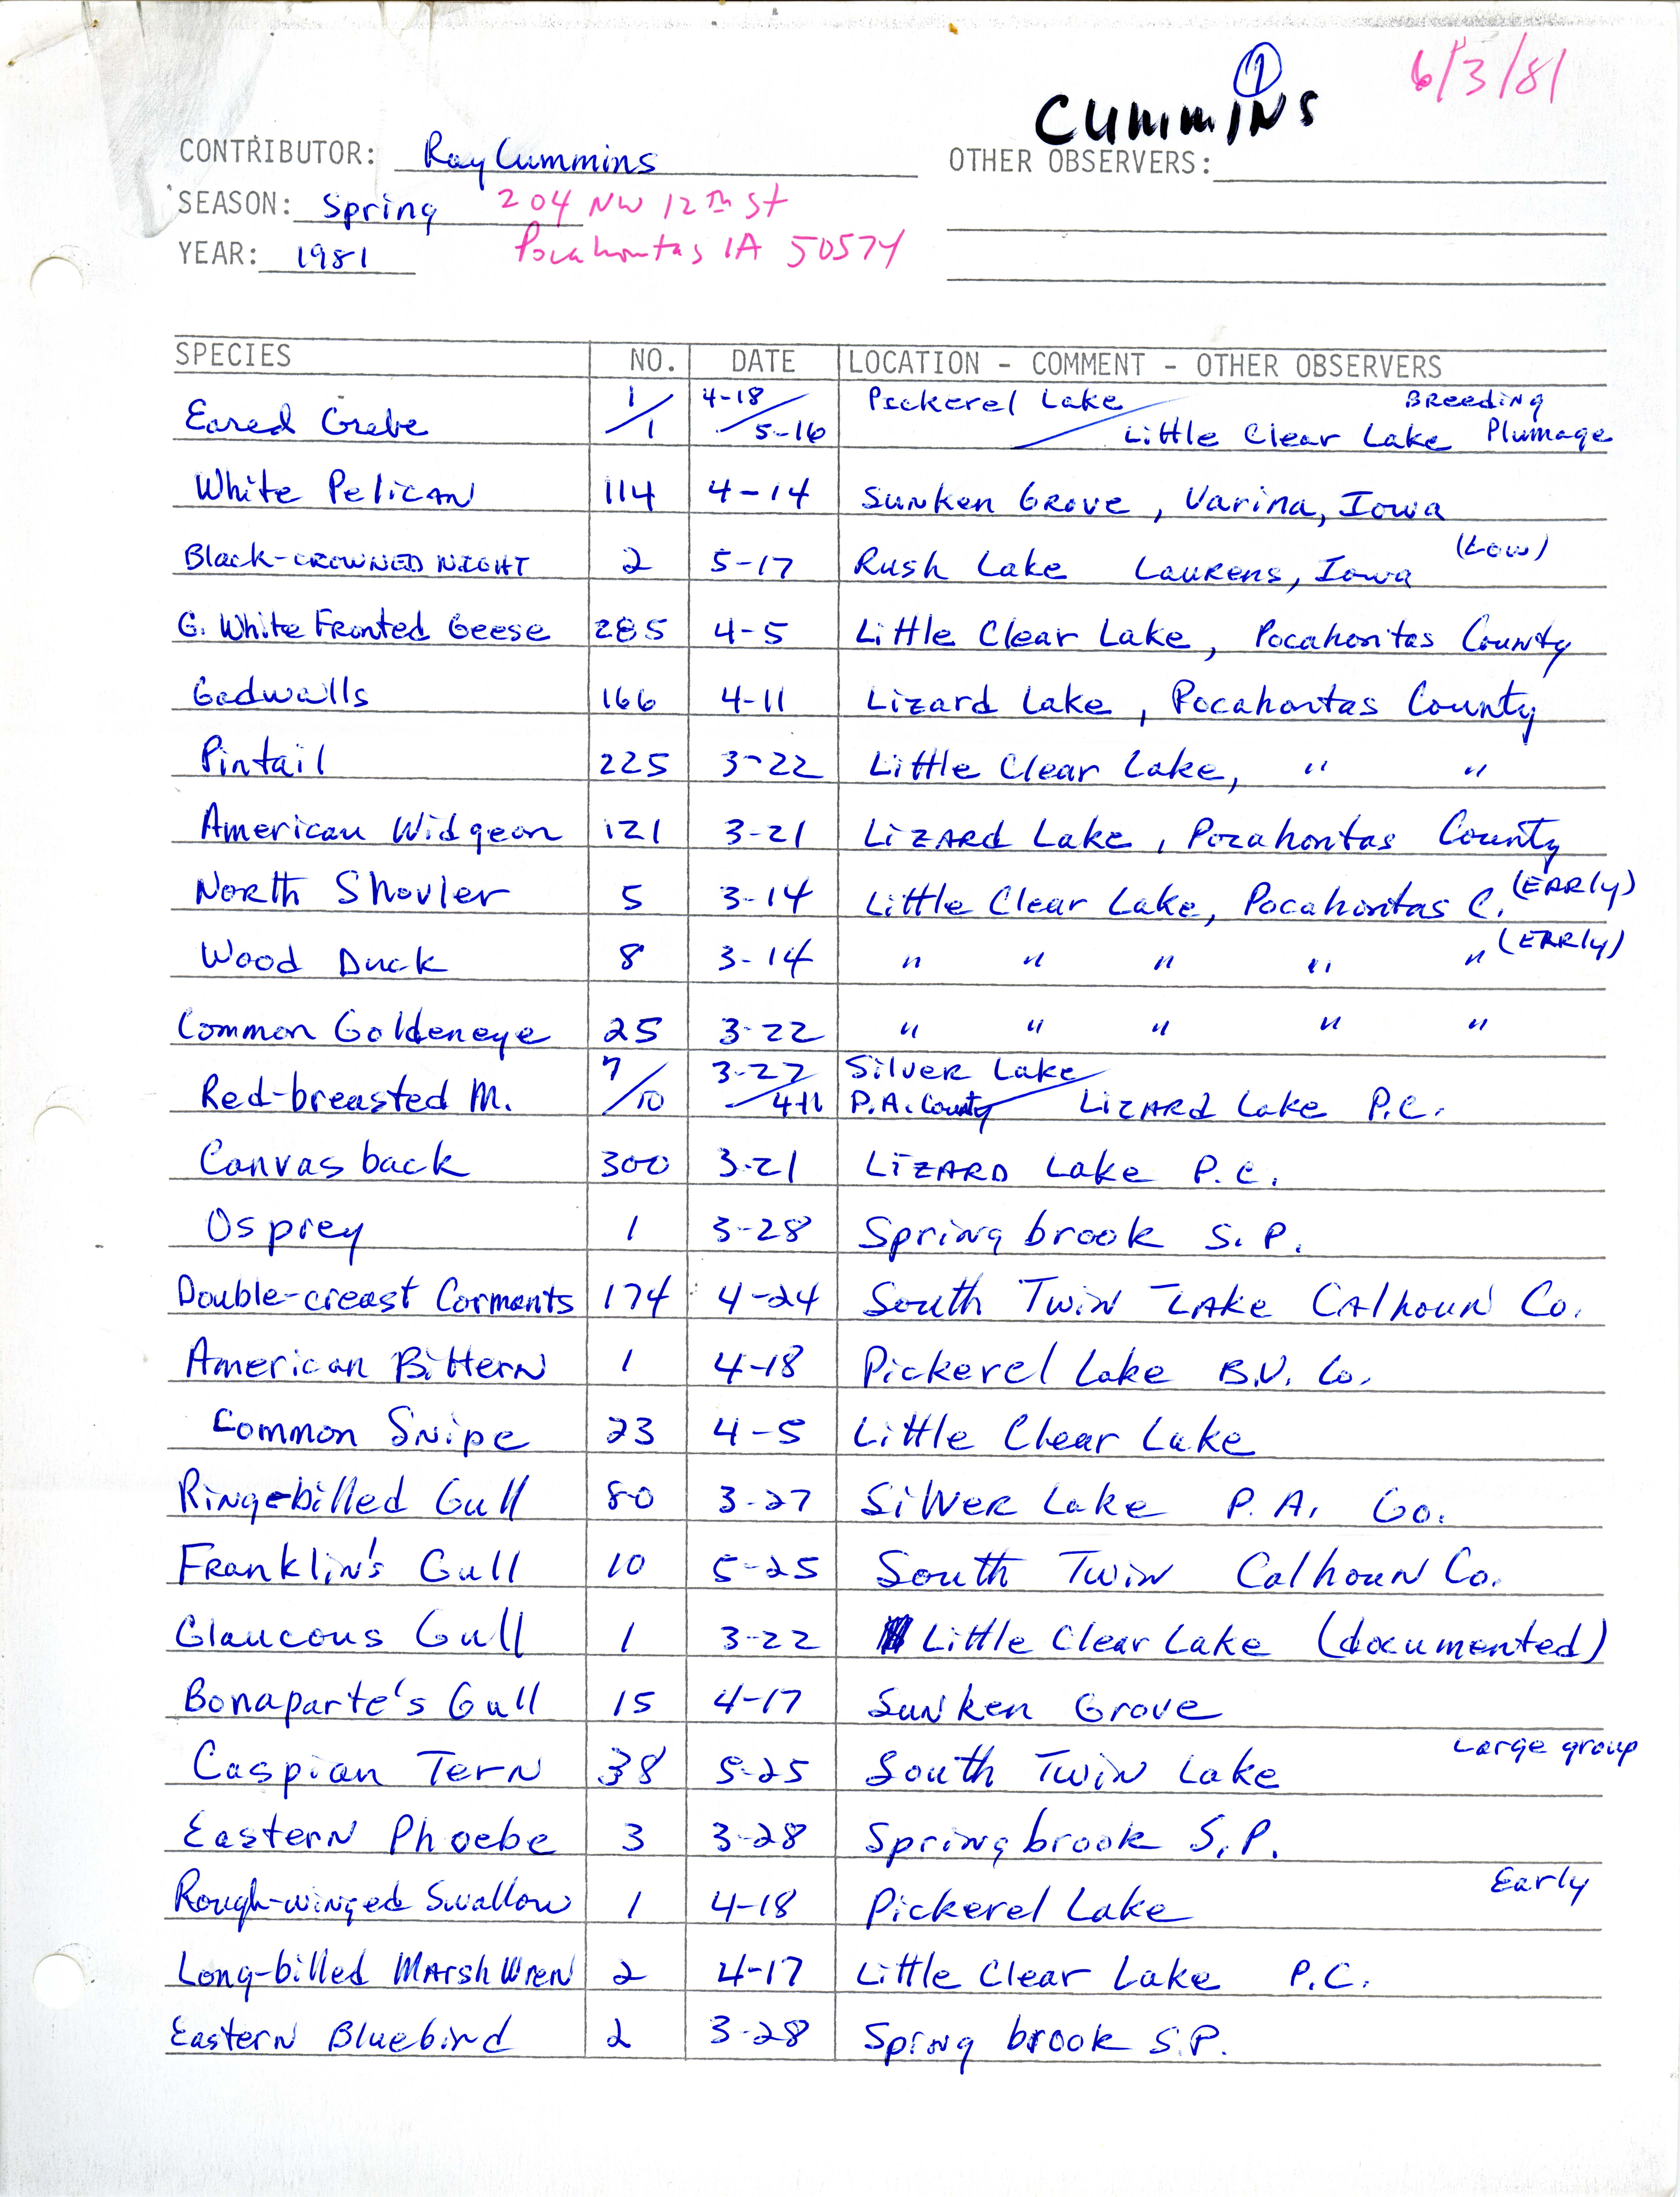 Annotated bird sighting list for spring 1981 compiled by Raymond Cummins